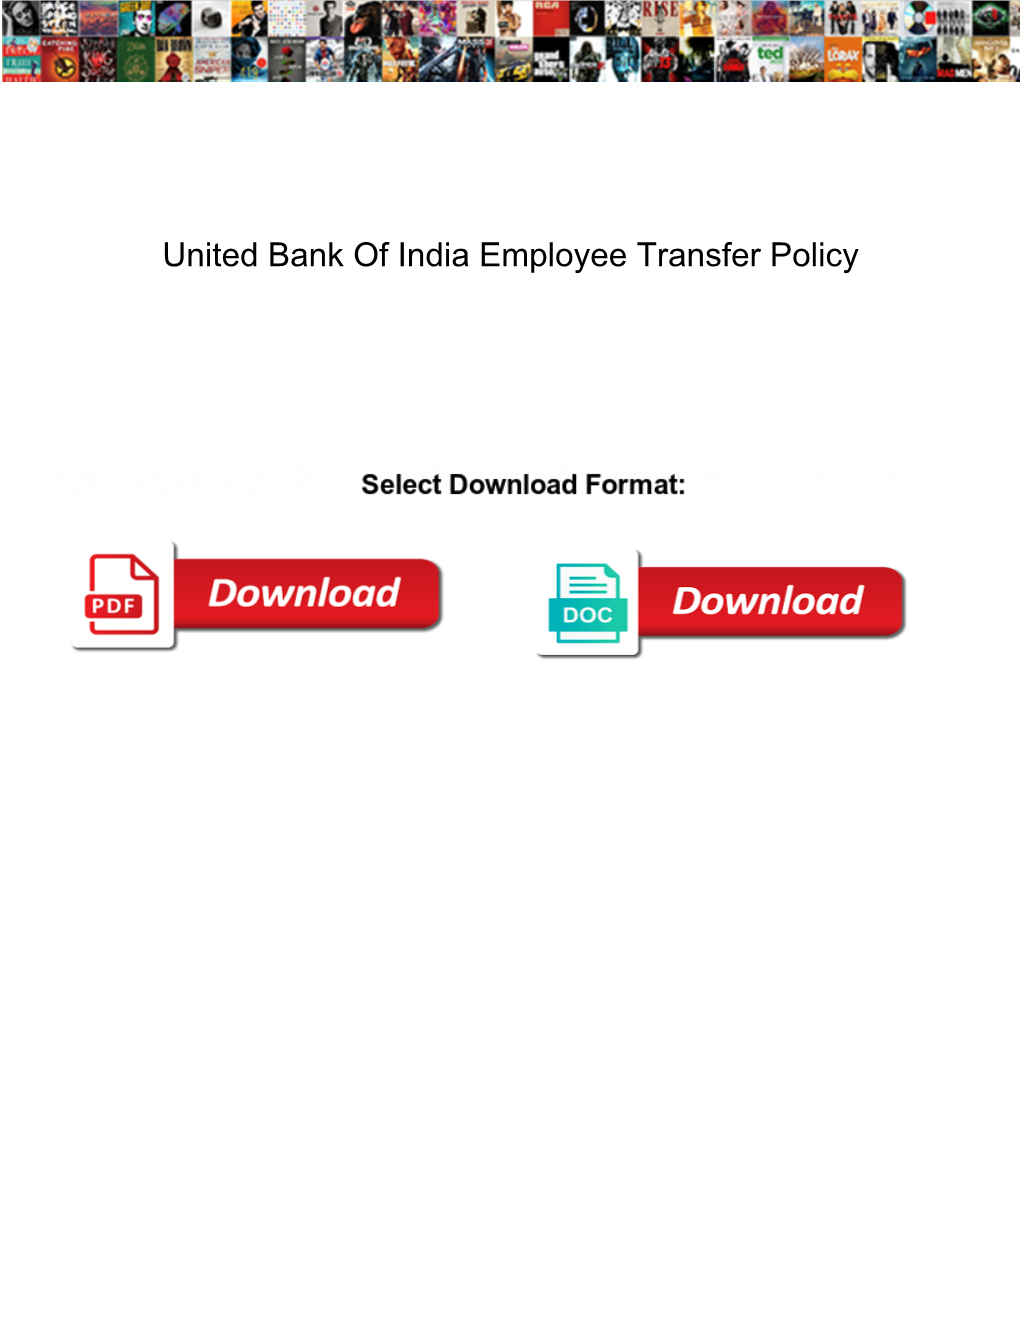 United Bank of India Employee Transfer Policy